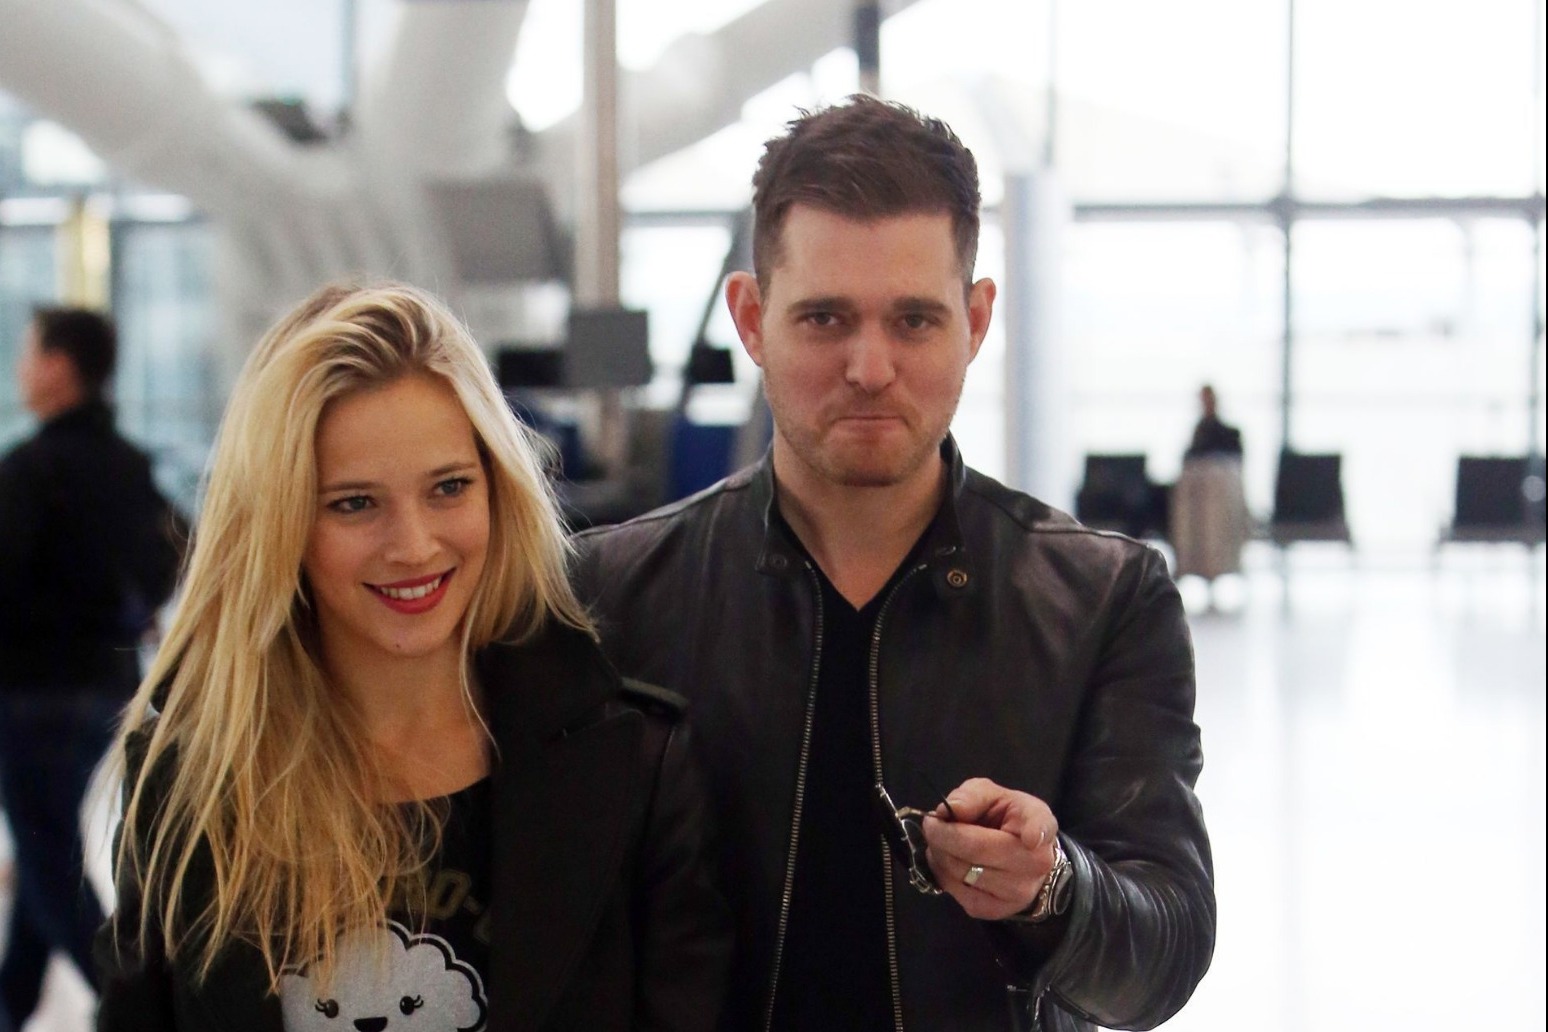 Michael Buble ‘so excited’ to perform for UK fans again 